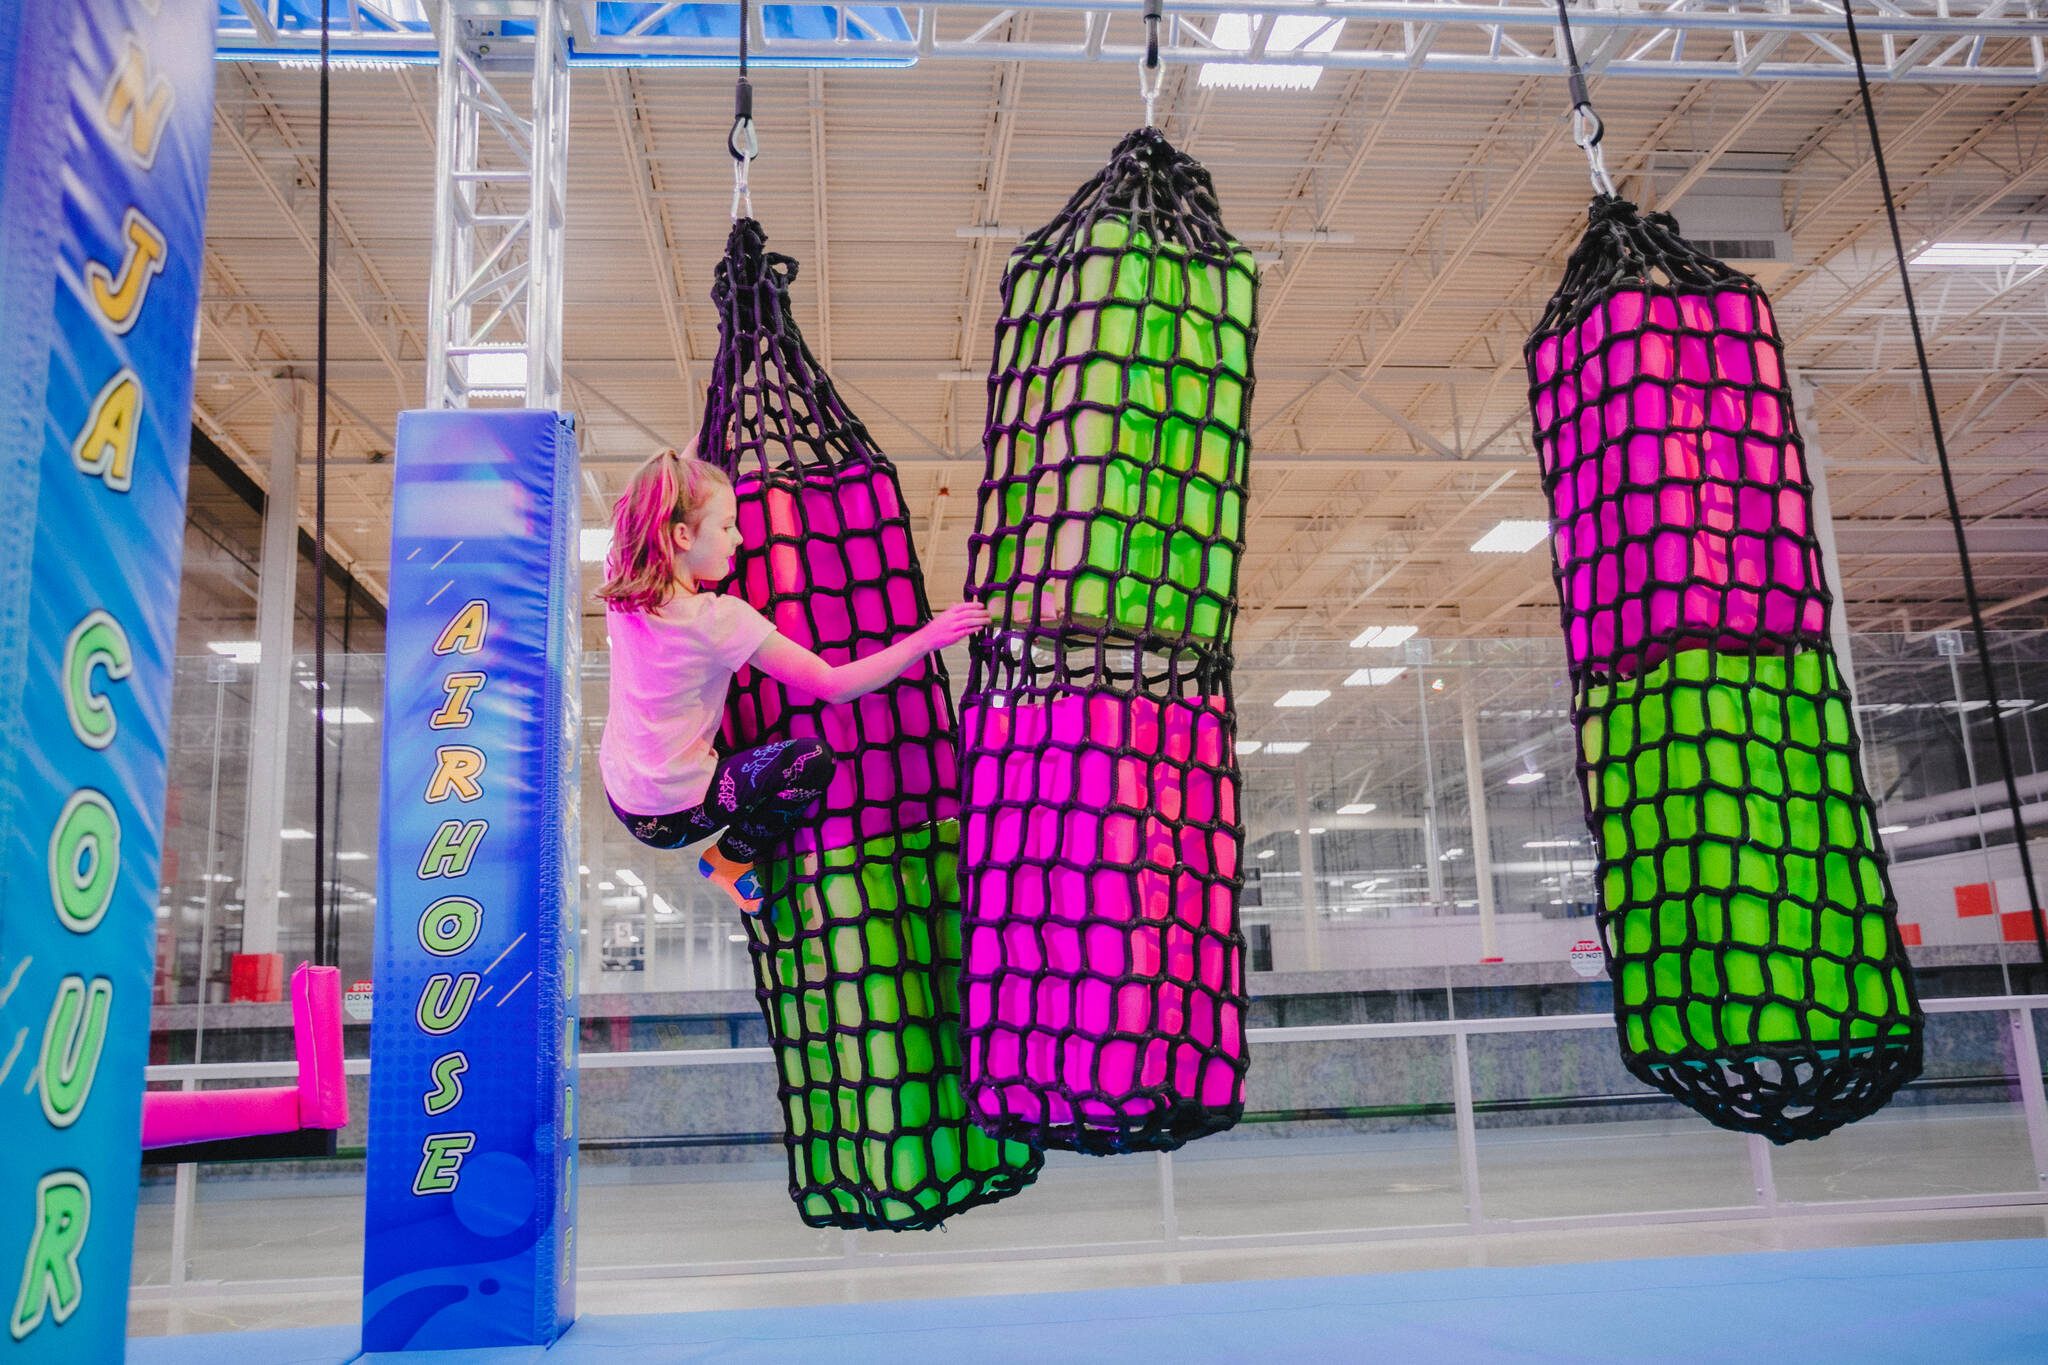 Airhouse Adventure Park is opening its doors to the public on Jan. 7, 2022, at 1101 Outlet Collection Way. Photo courtesy of Airhouse Adventure Park.